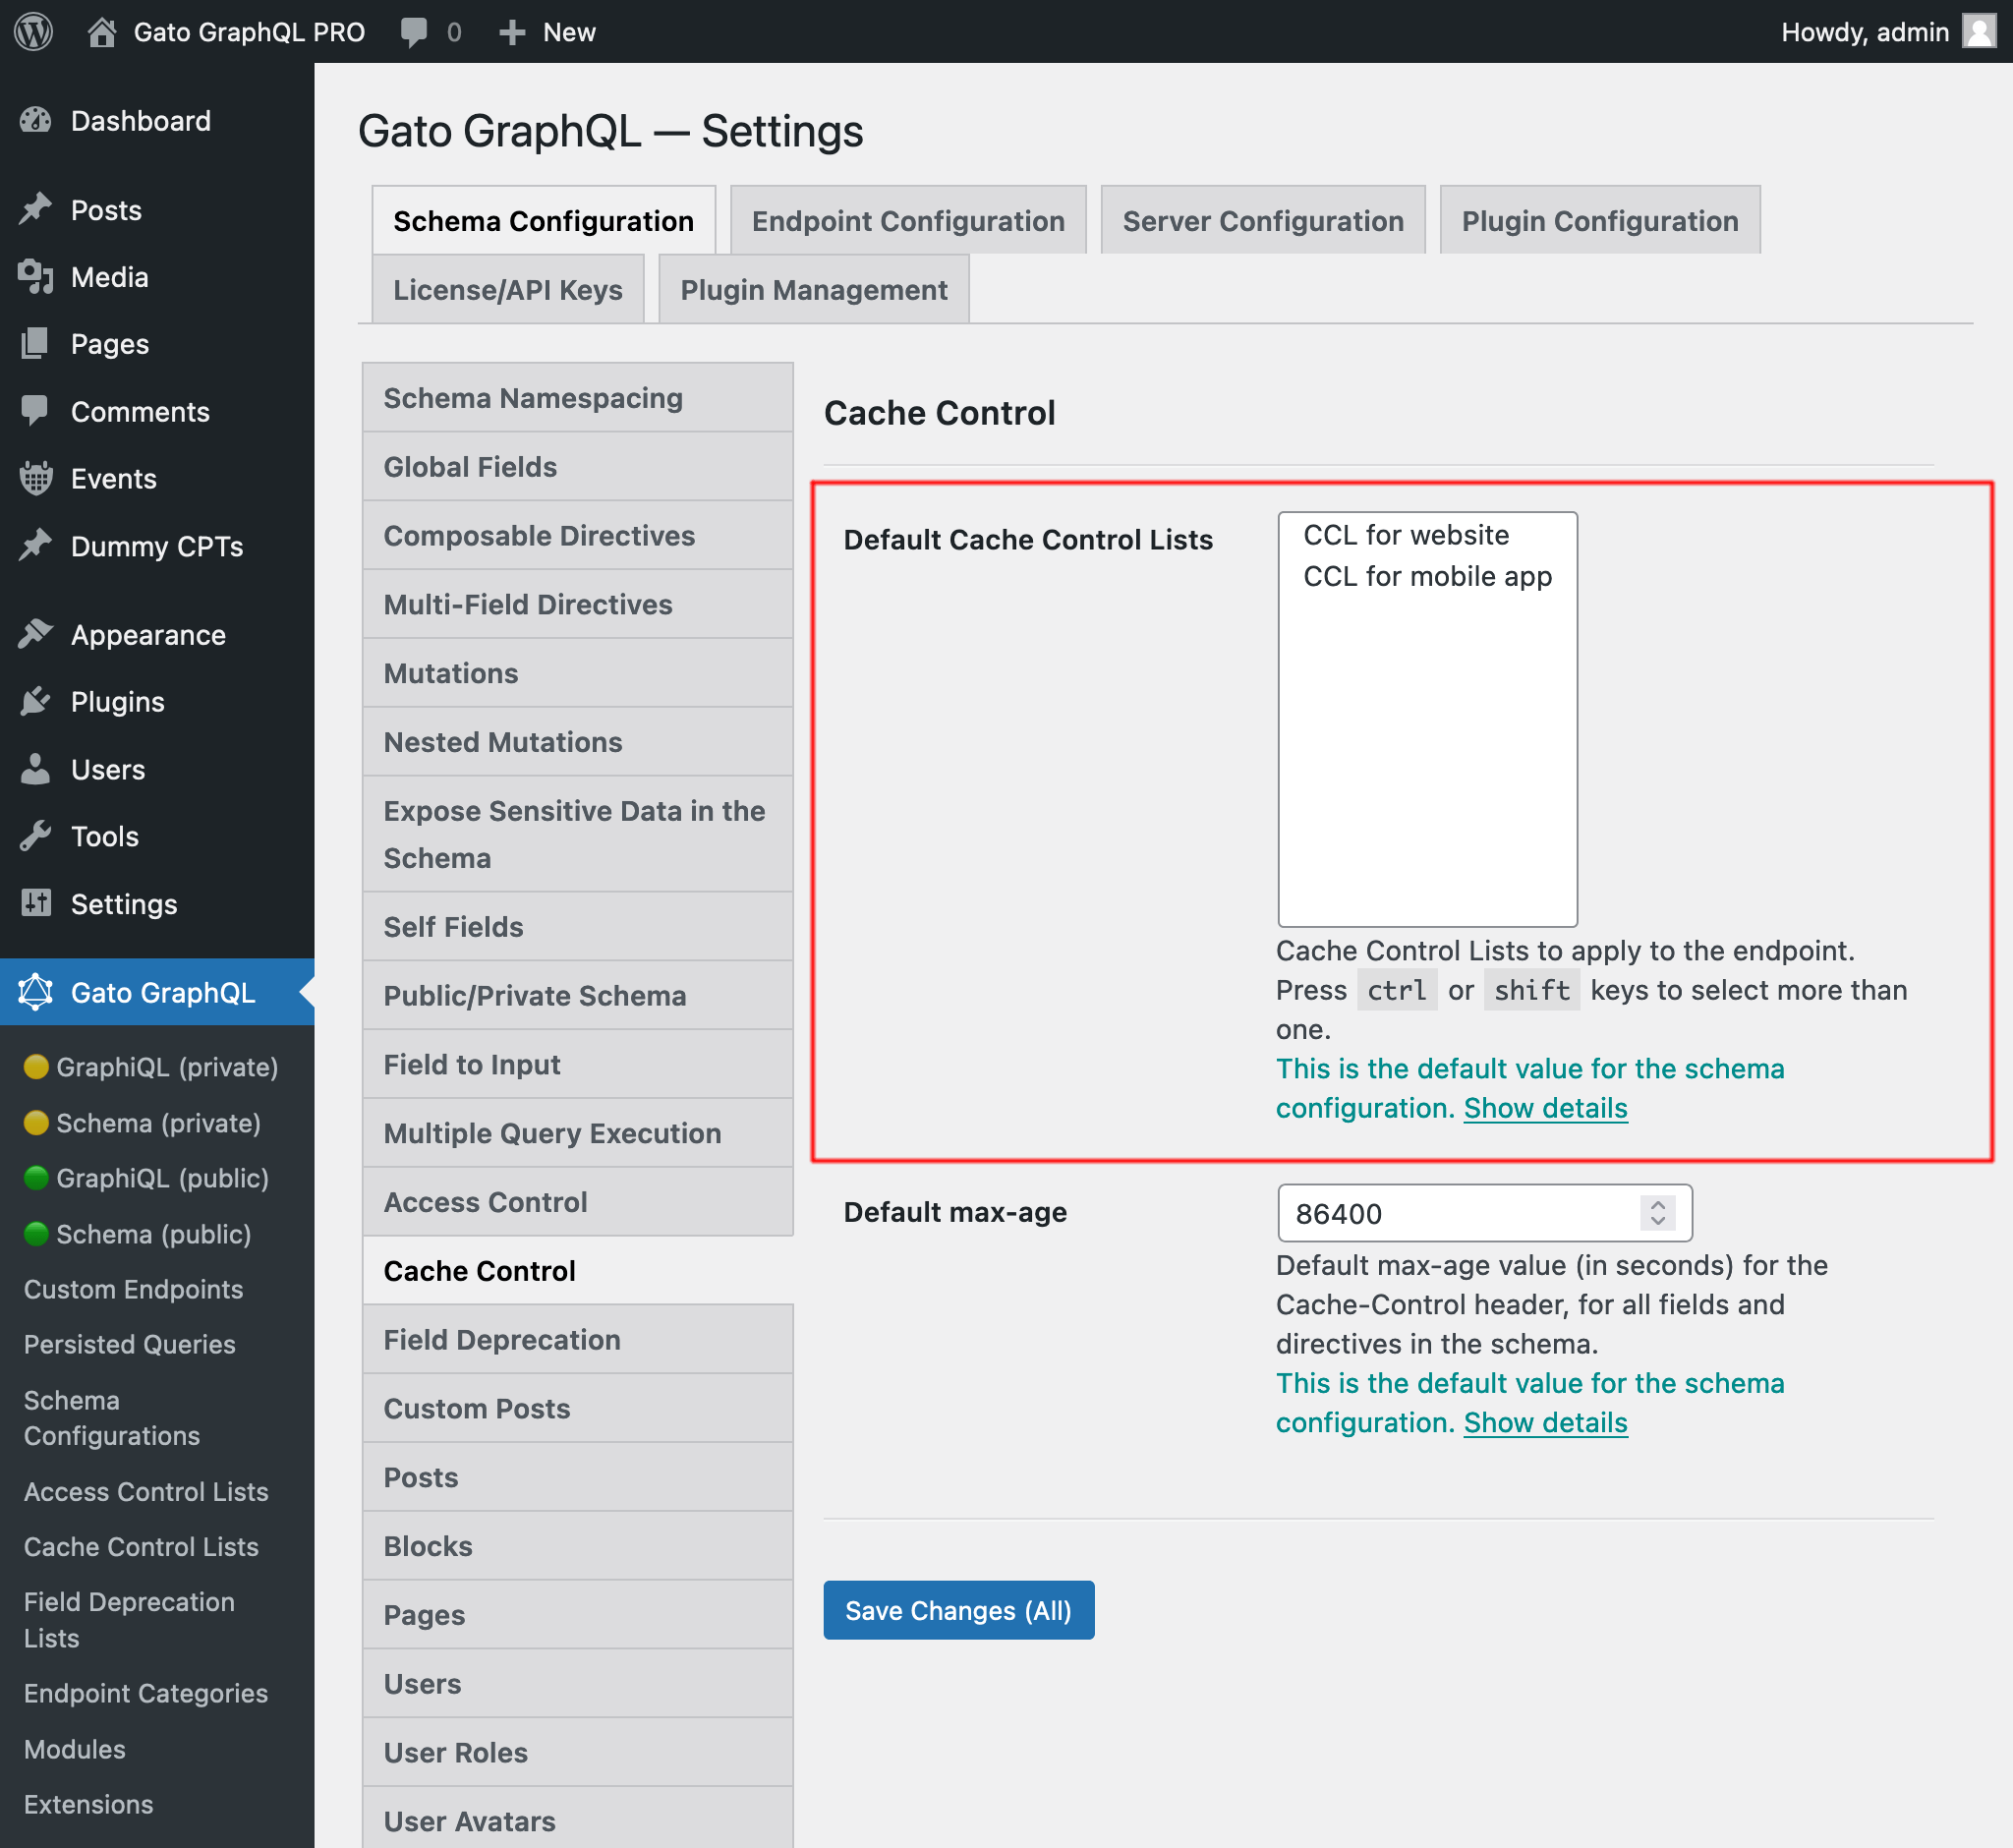 Selecting the default Cache Control Lists in the Settings page